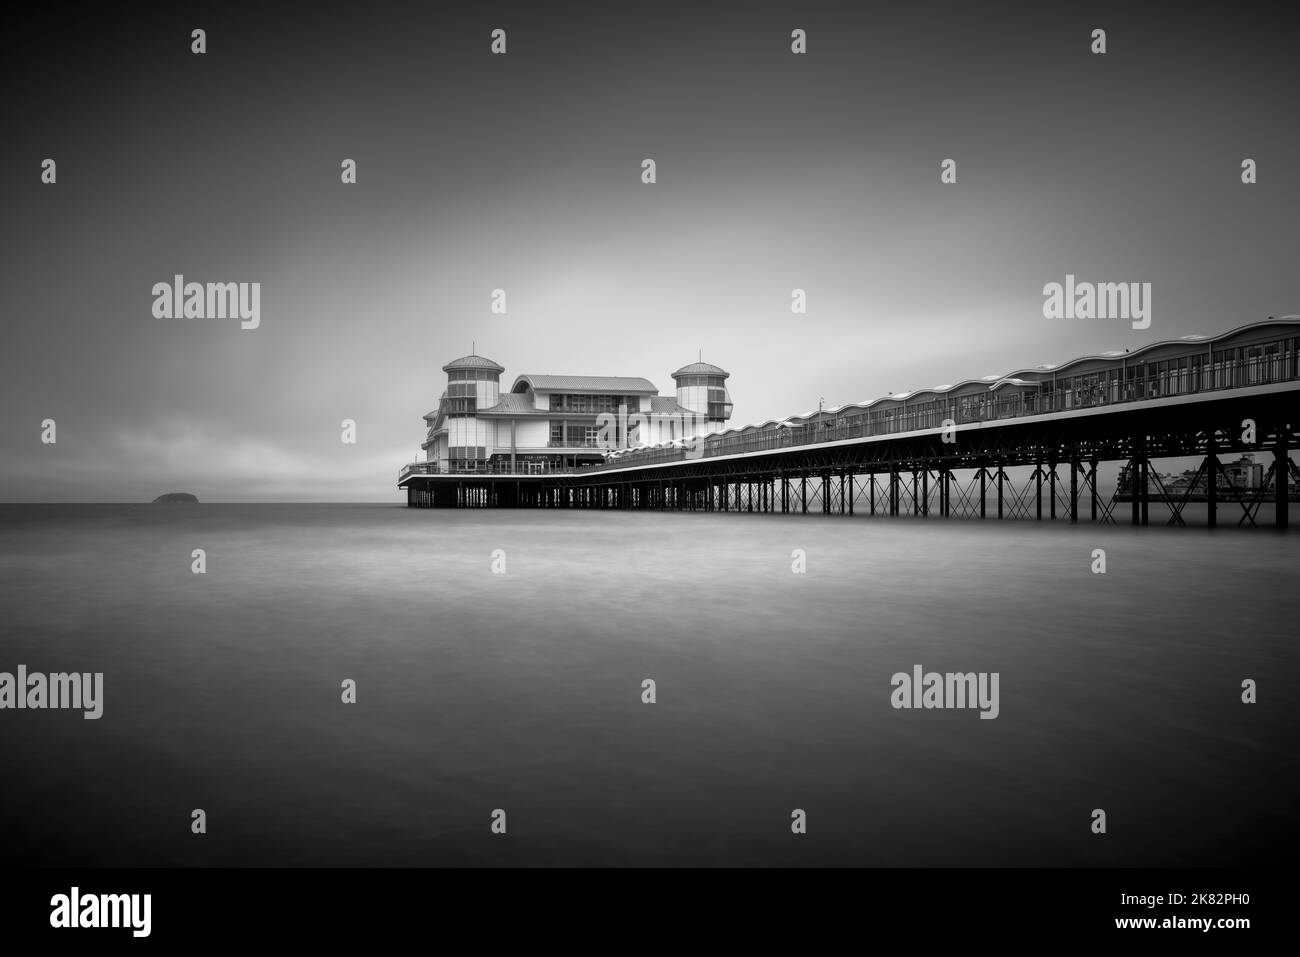 A black and white image of the Grand Pier in the Bristol Channel at Weston-super-Mare, North Somerset, England. Stock Photo